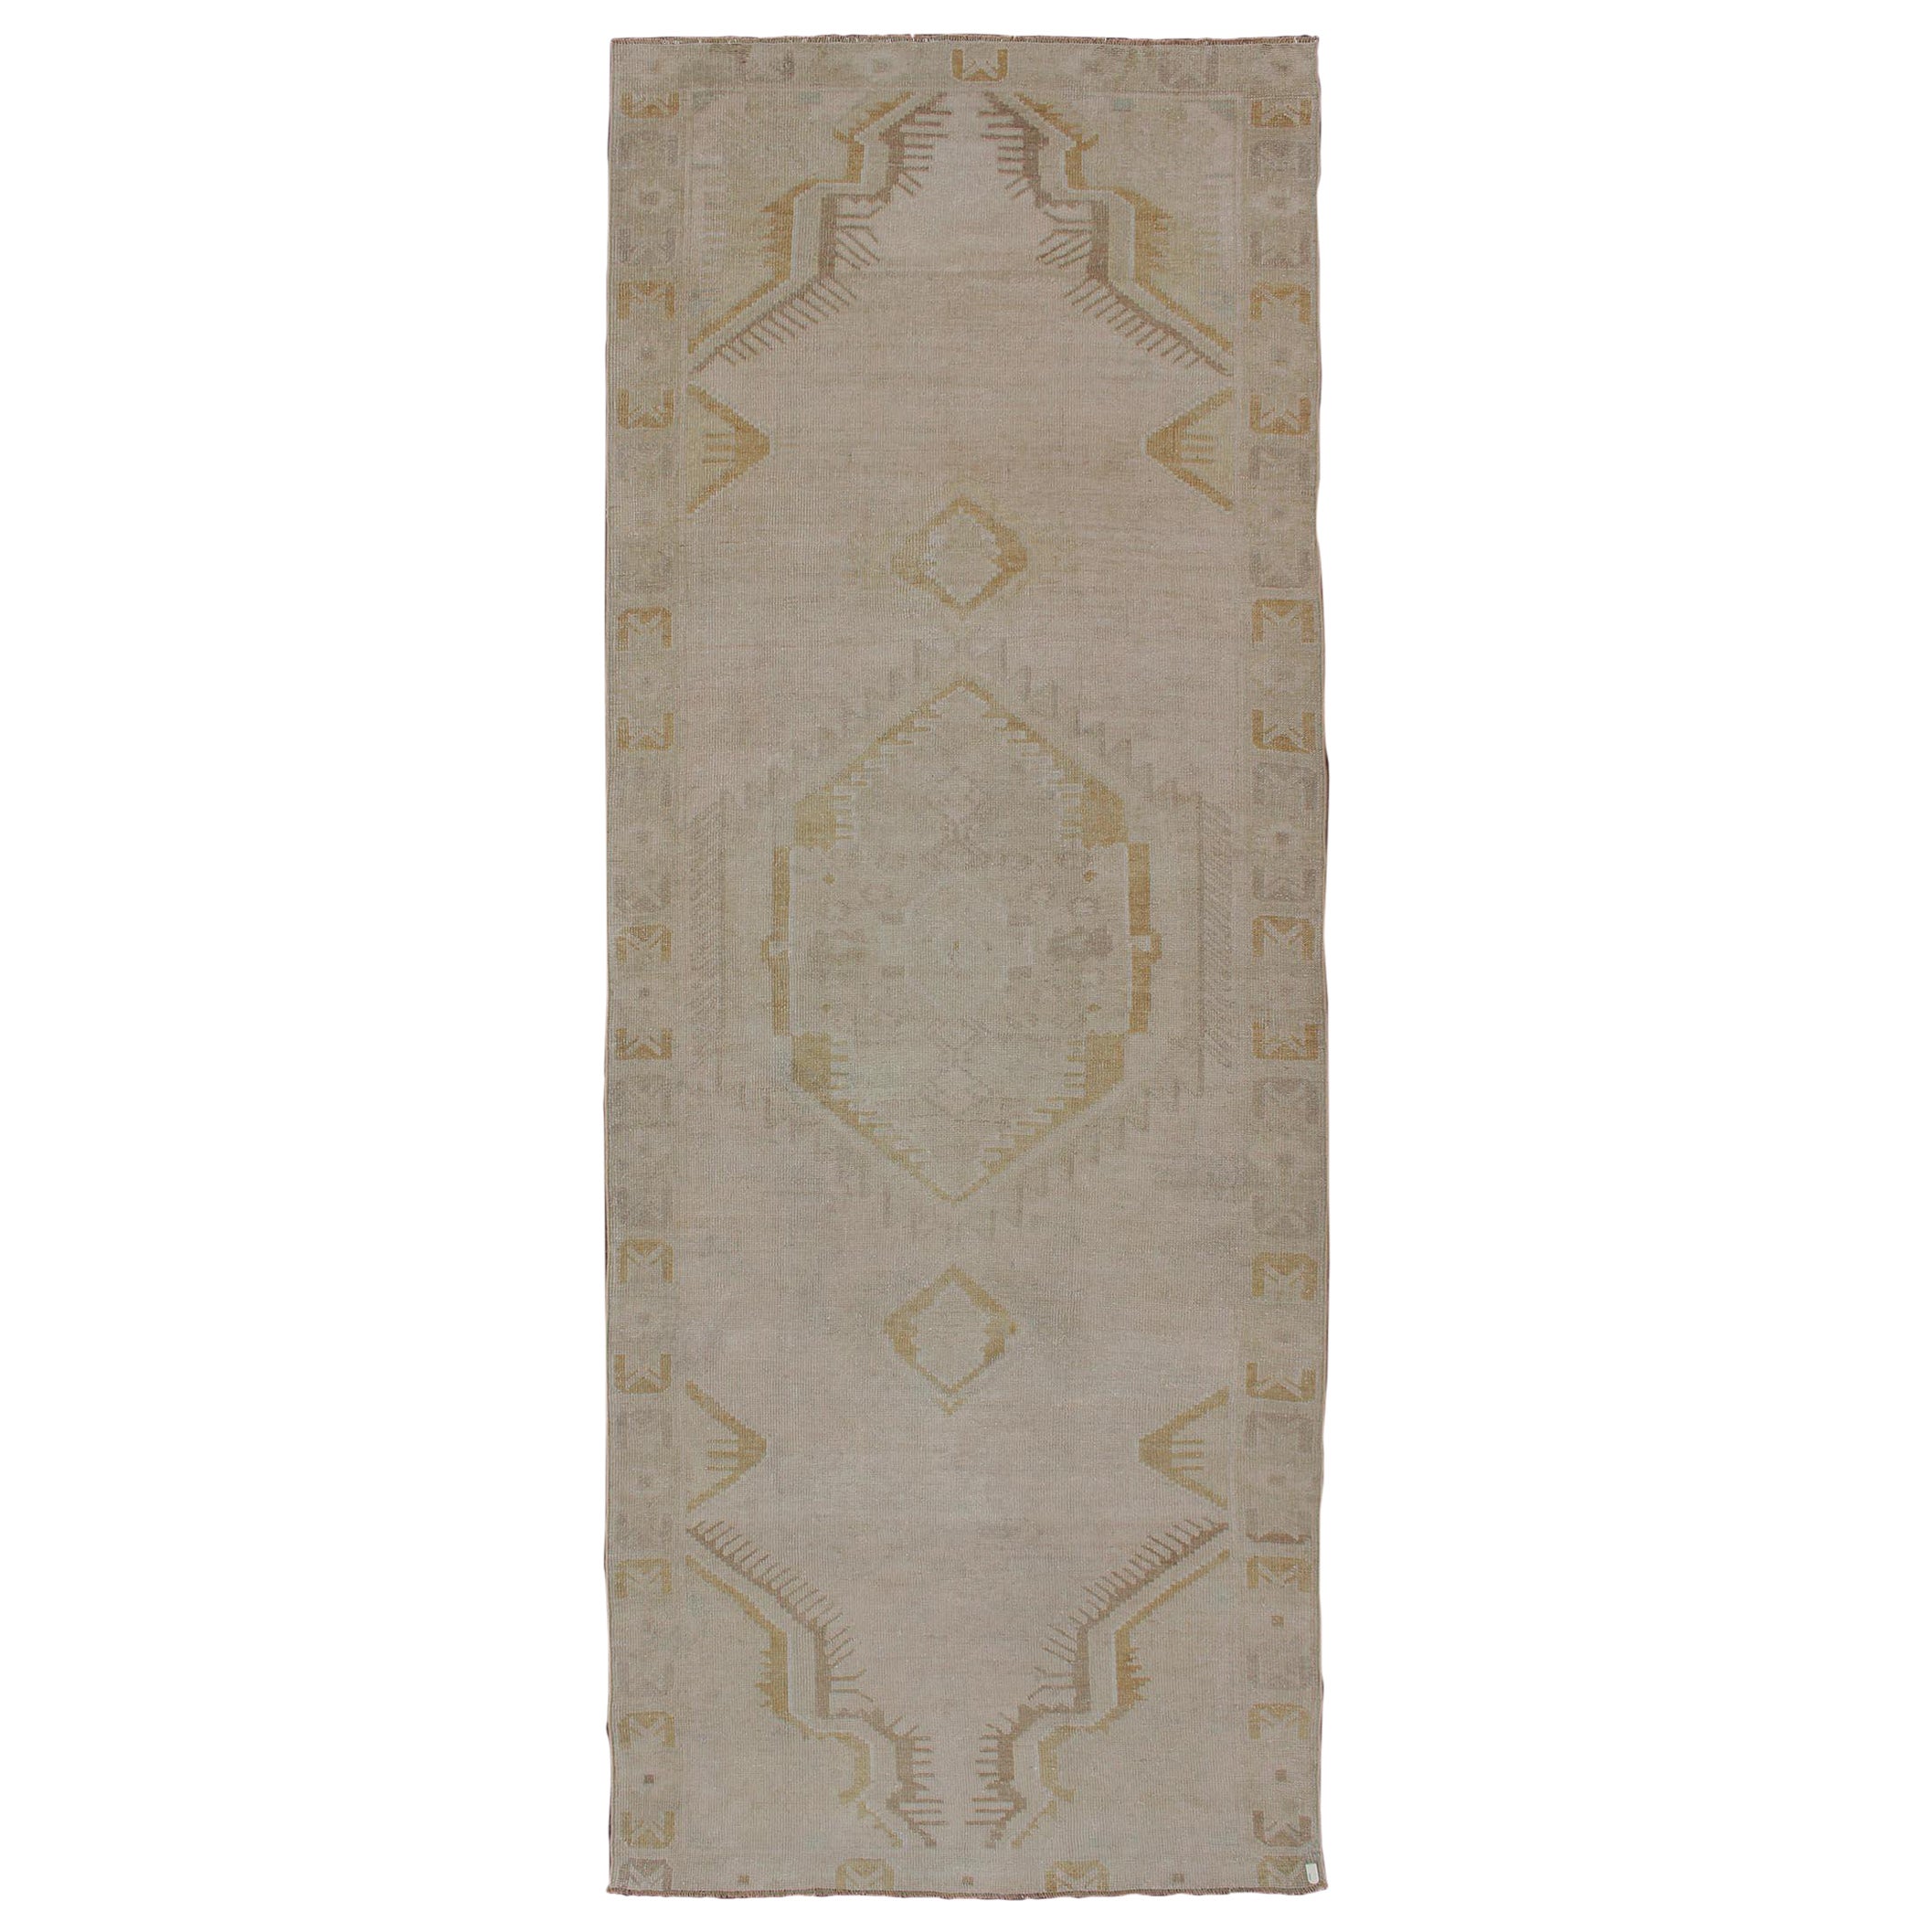 Light Colored Vintage Oushak Runner with Geometric Medallions in Taupe Color